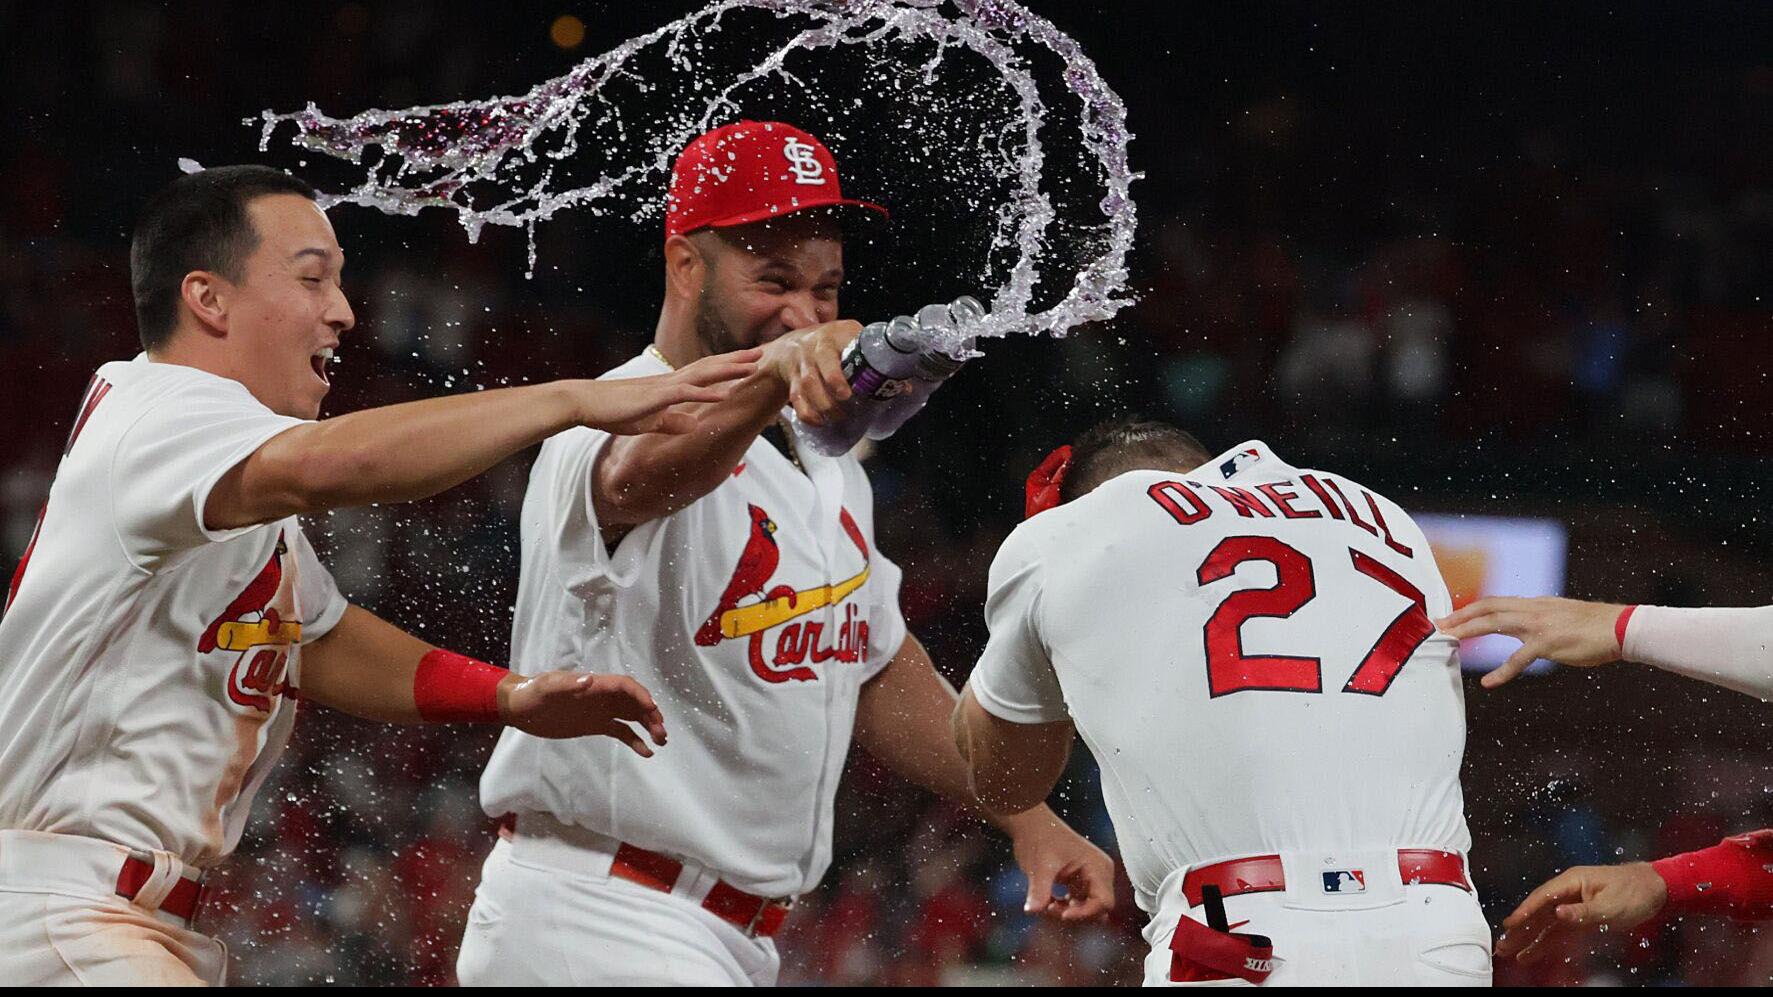 Quick hits: Cardinals nick Rockies 5-4 on hit batsman with bases loaded in ninth